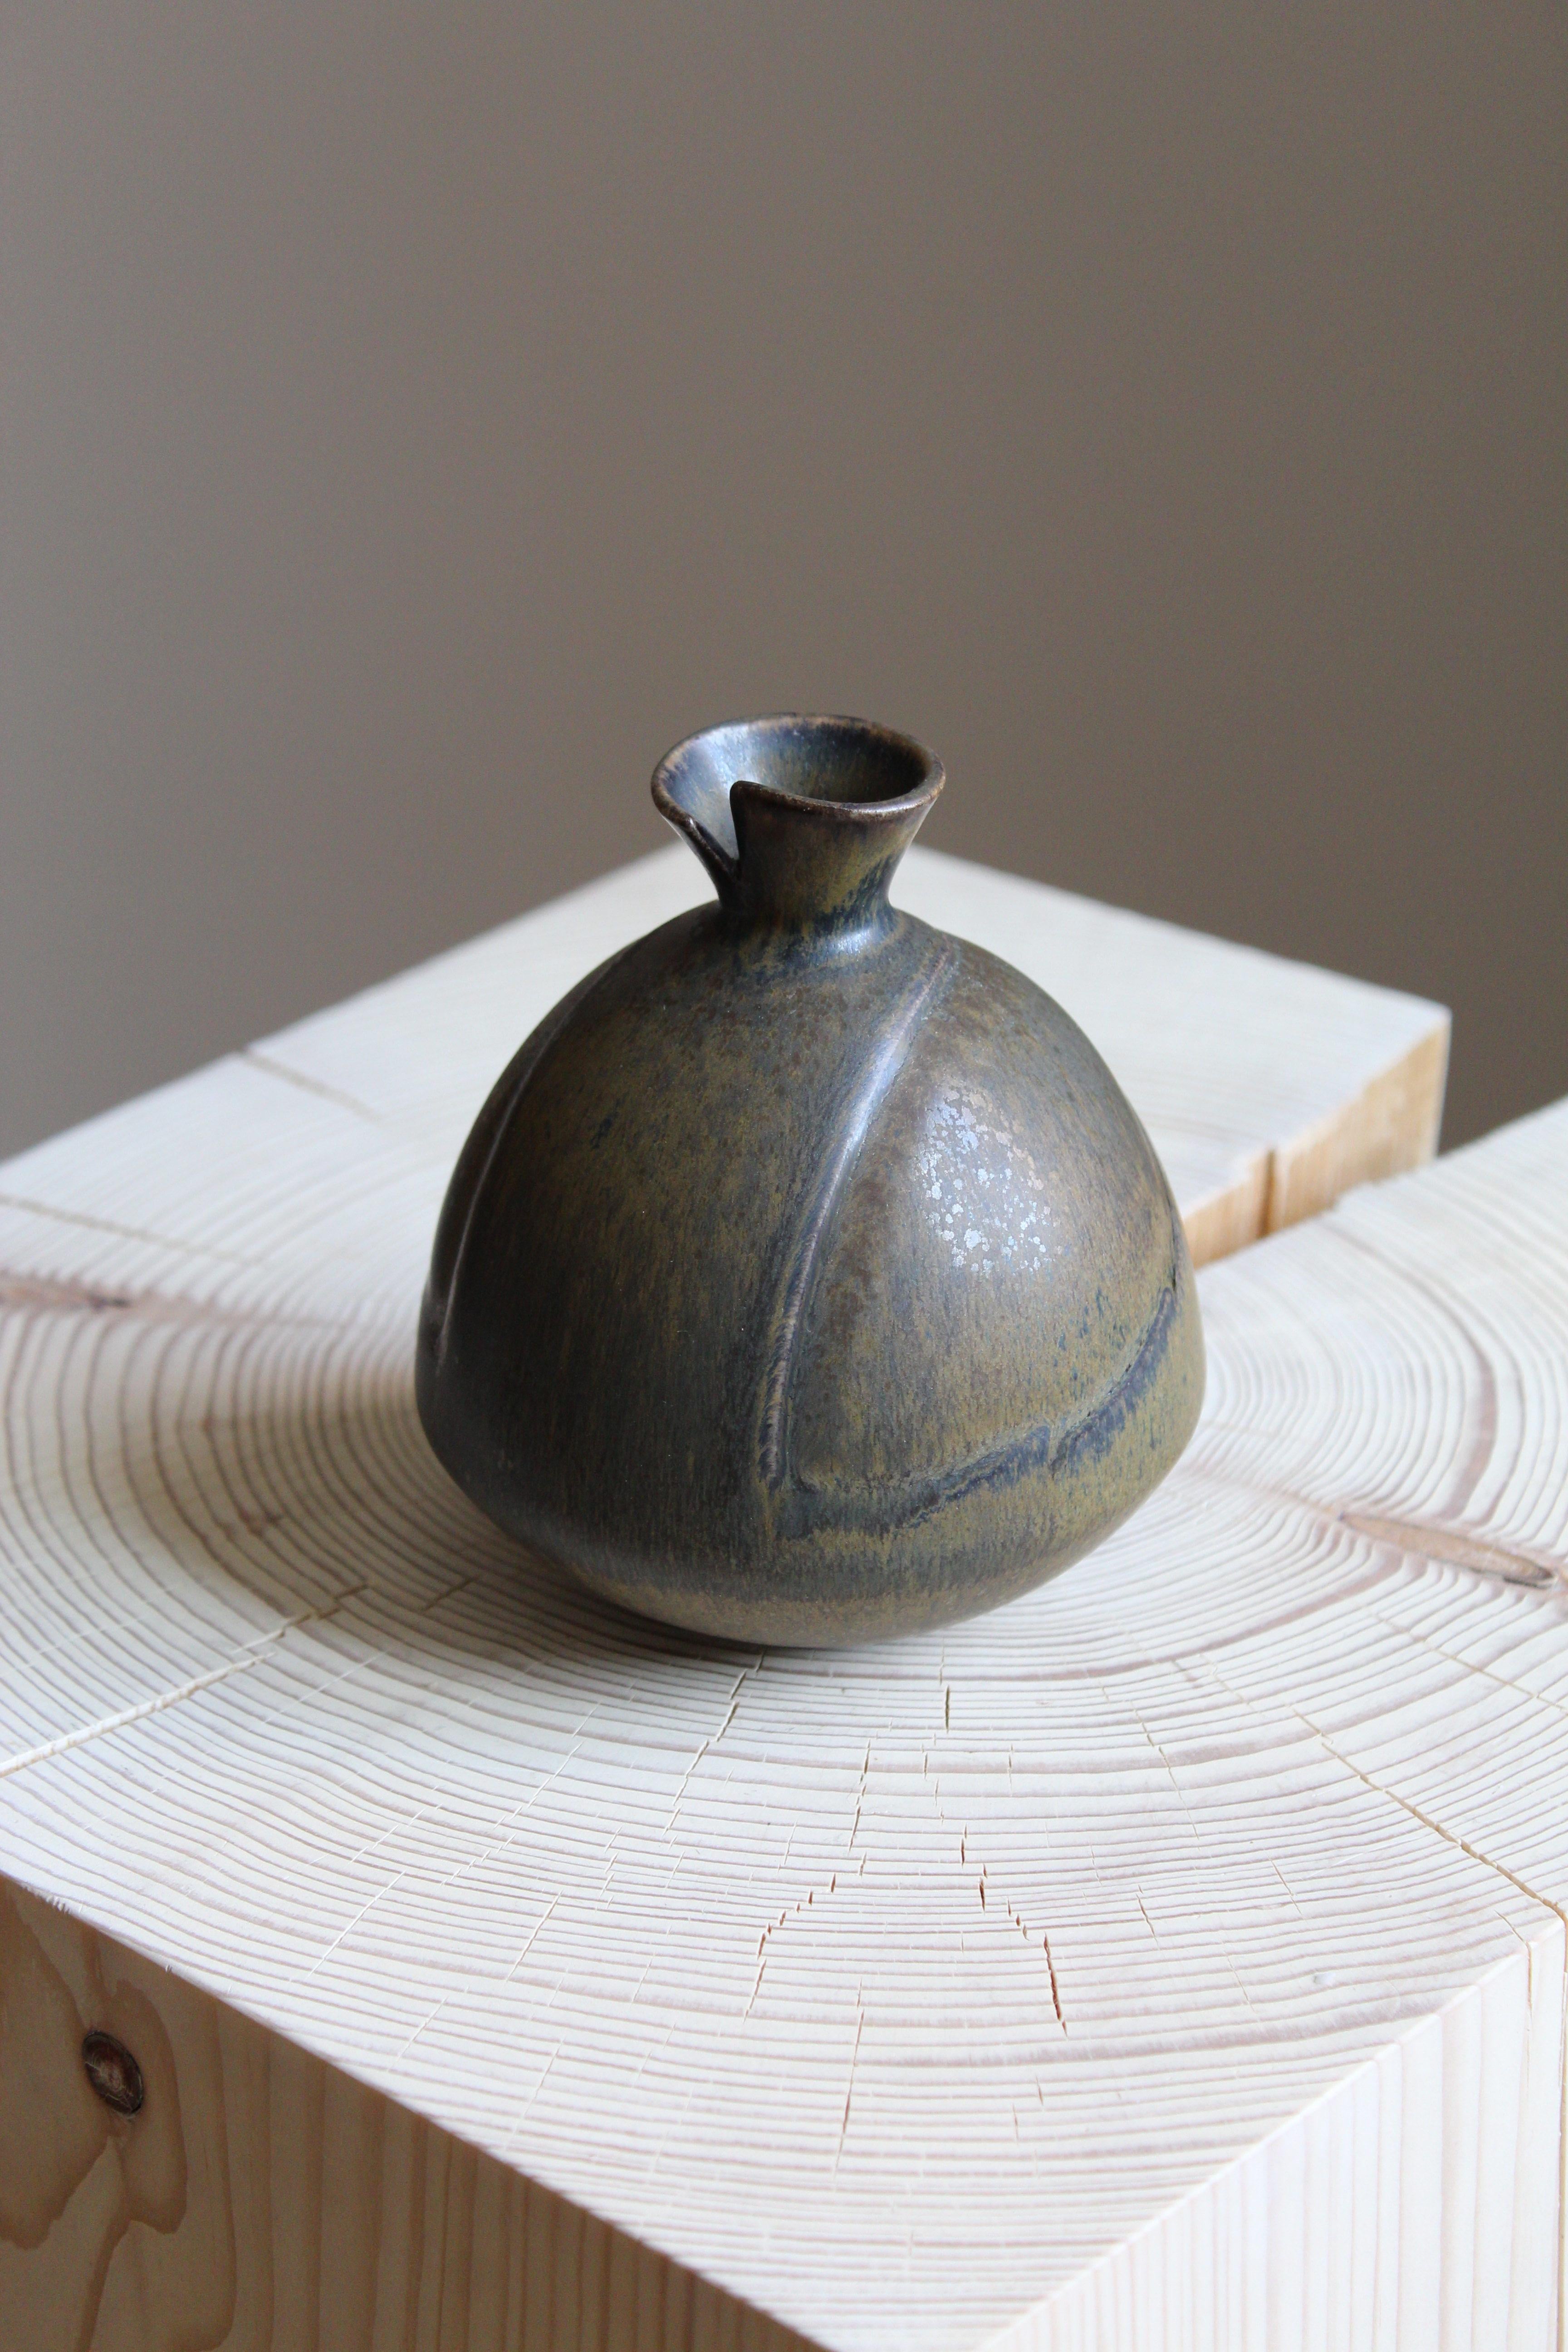 An organically shaped small stoneware vase by Gabi Citron Tengborg for the iconic Swedish firm Gustavsberg. 

Other ceramicists of the period include Berndt Friberg, Axel Salto, Carl-Harry Stålhane and Wilhelm Kåge.